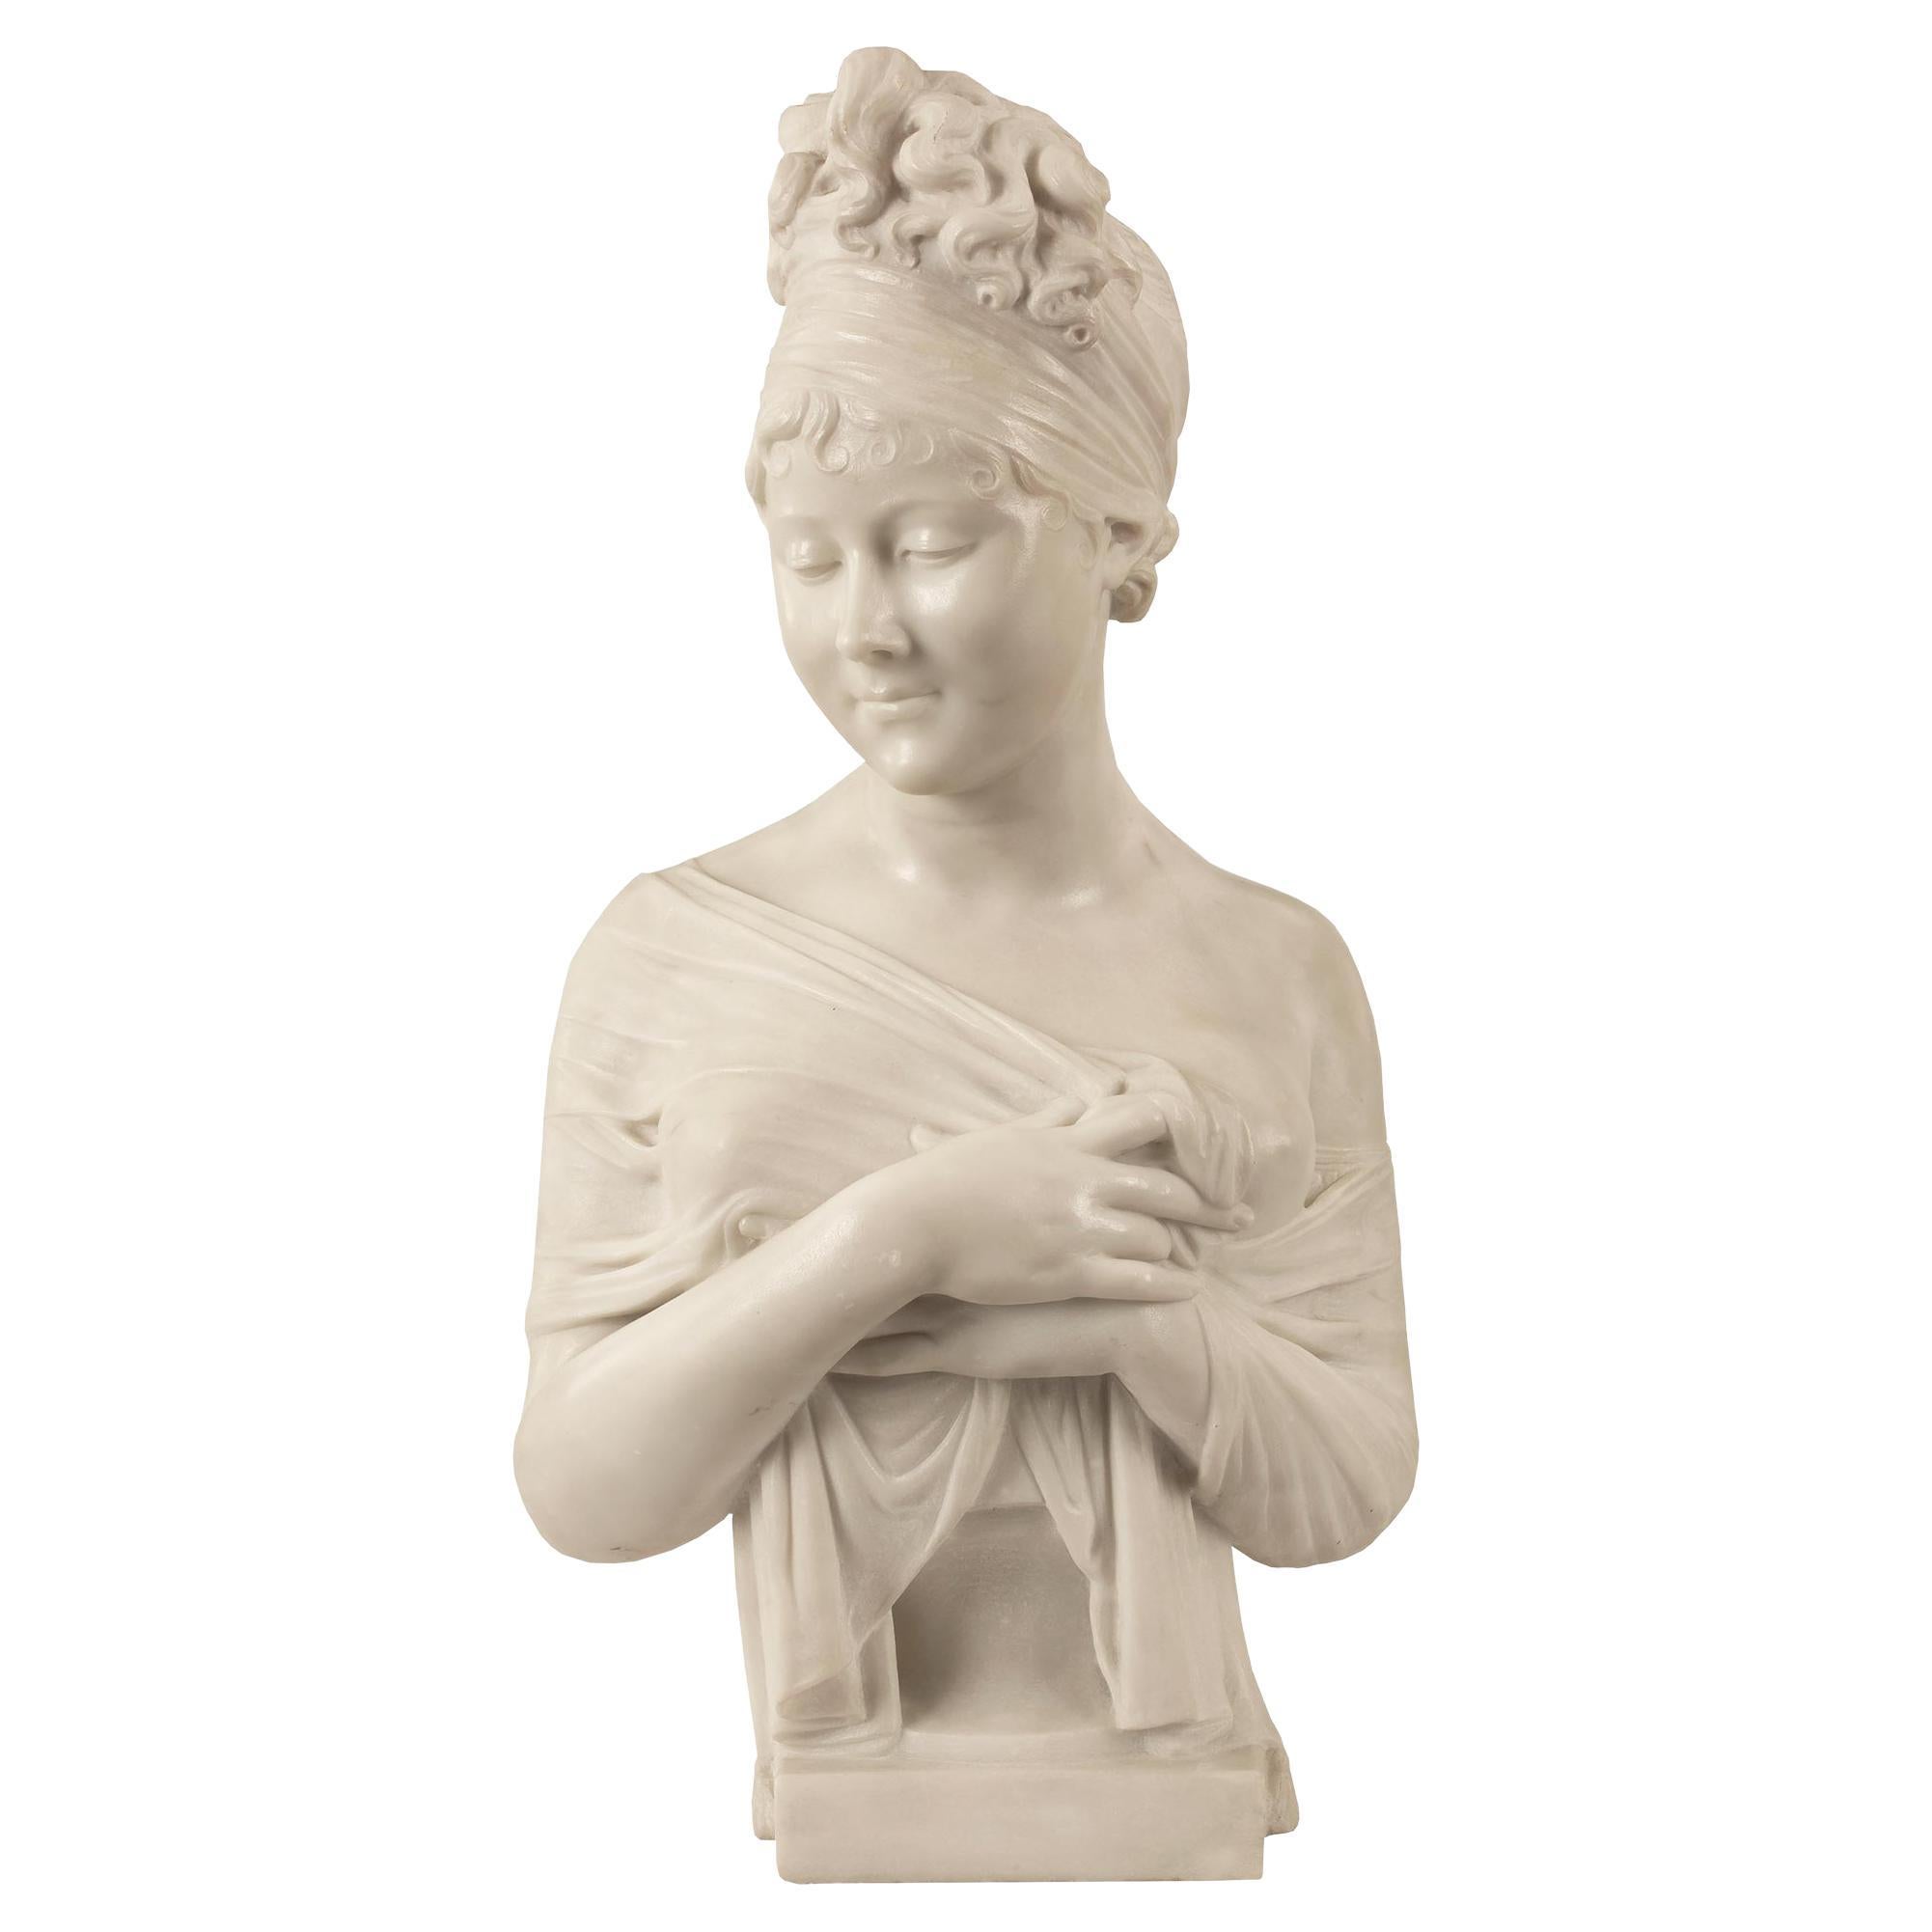 Italian 19th Century Neoclassical St. Carrara Marble Bust of Juliette Recamier For Sale